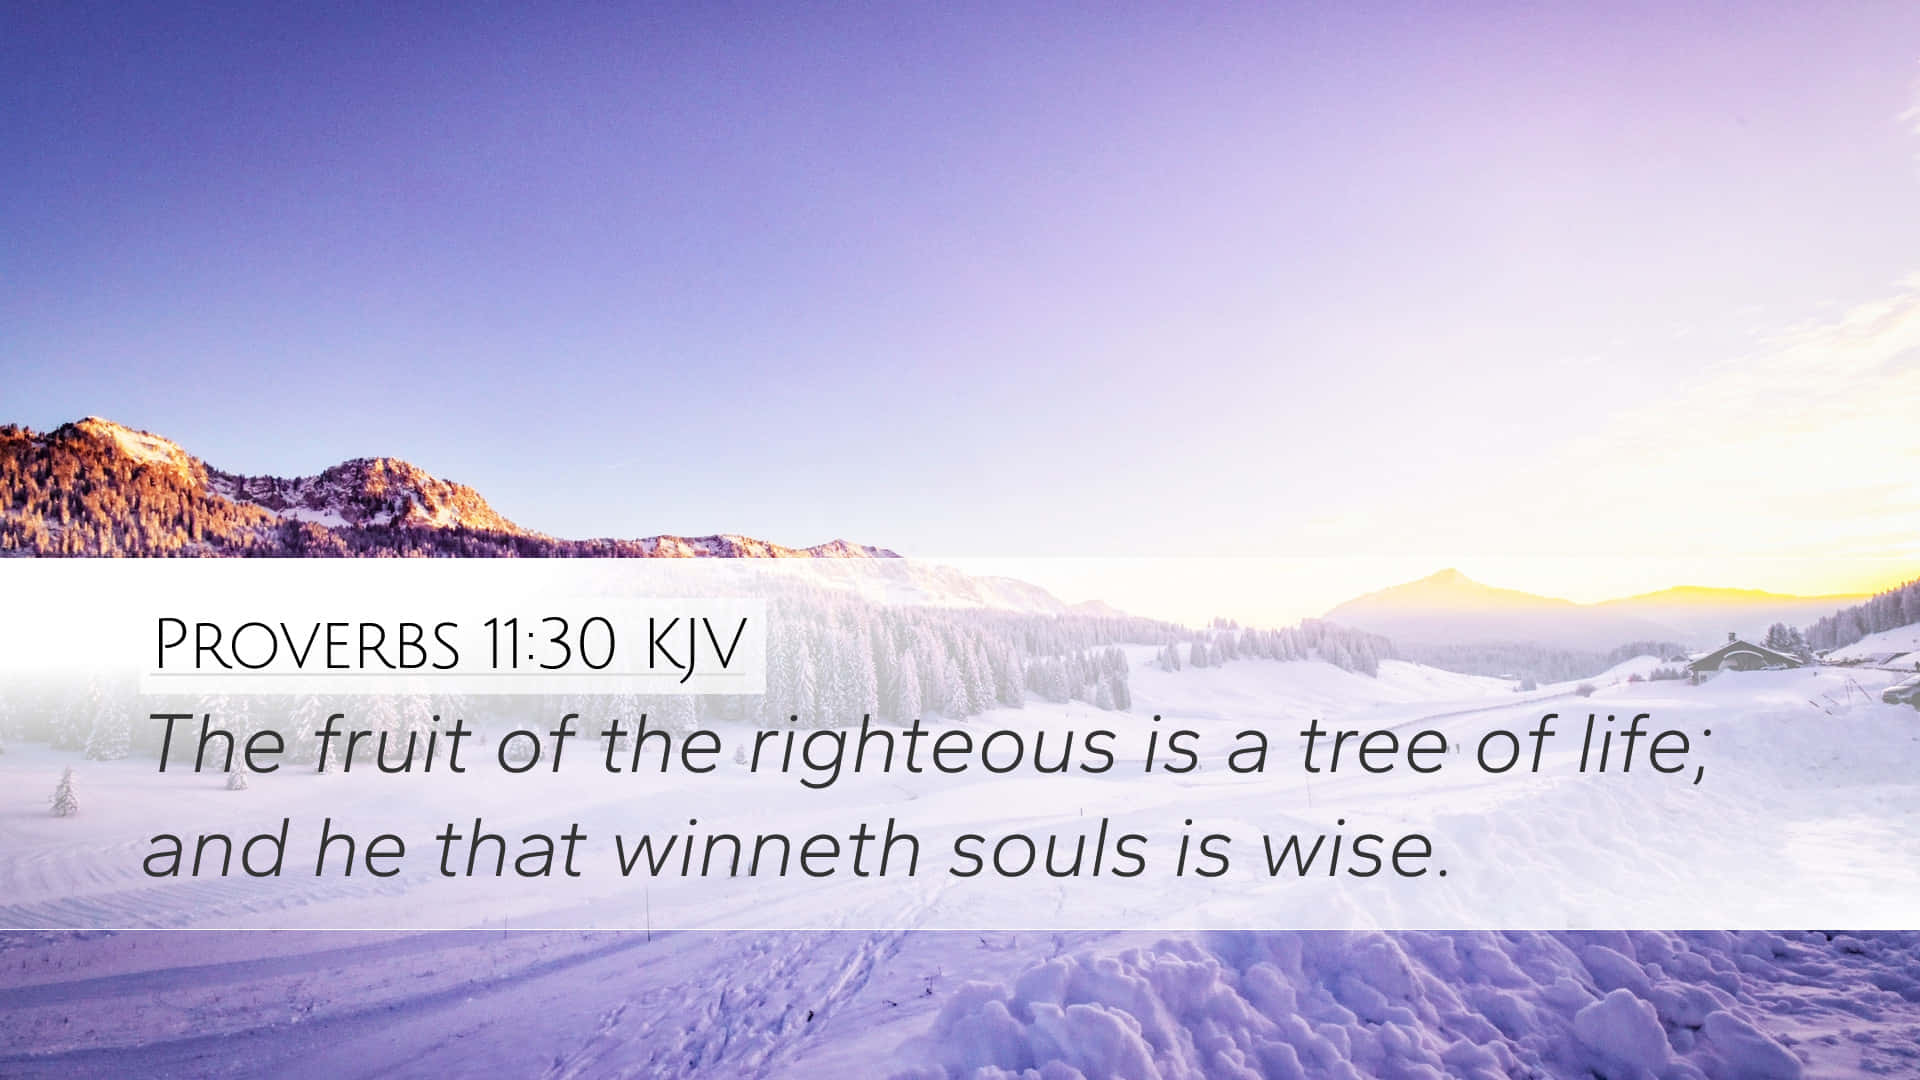 Righteous Is A Tree Of Life Verse Wallpaper